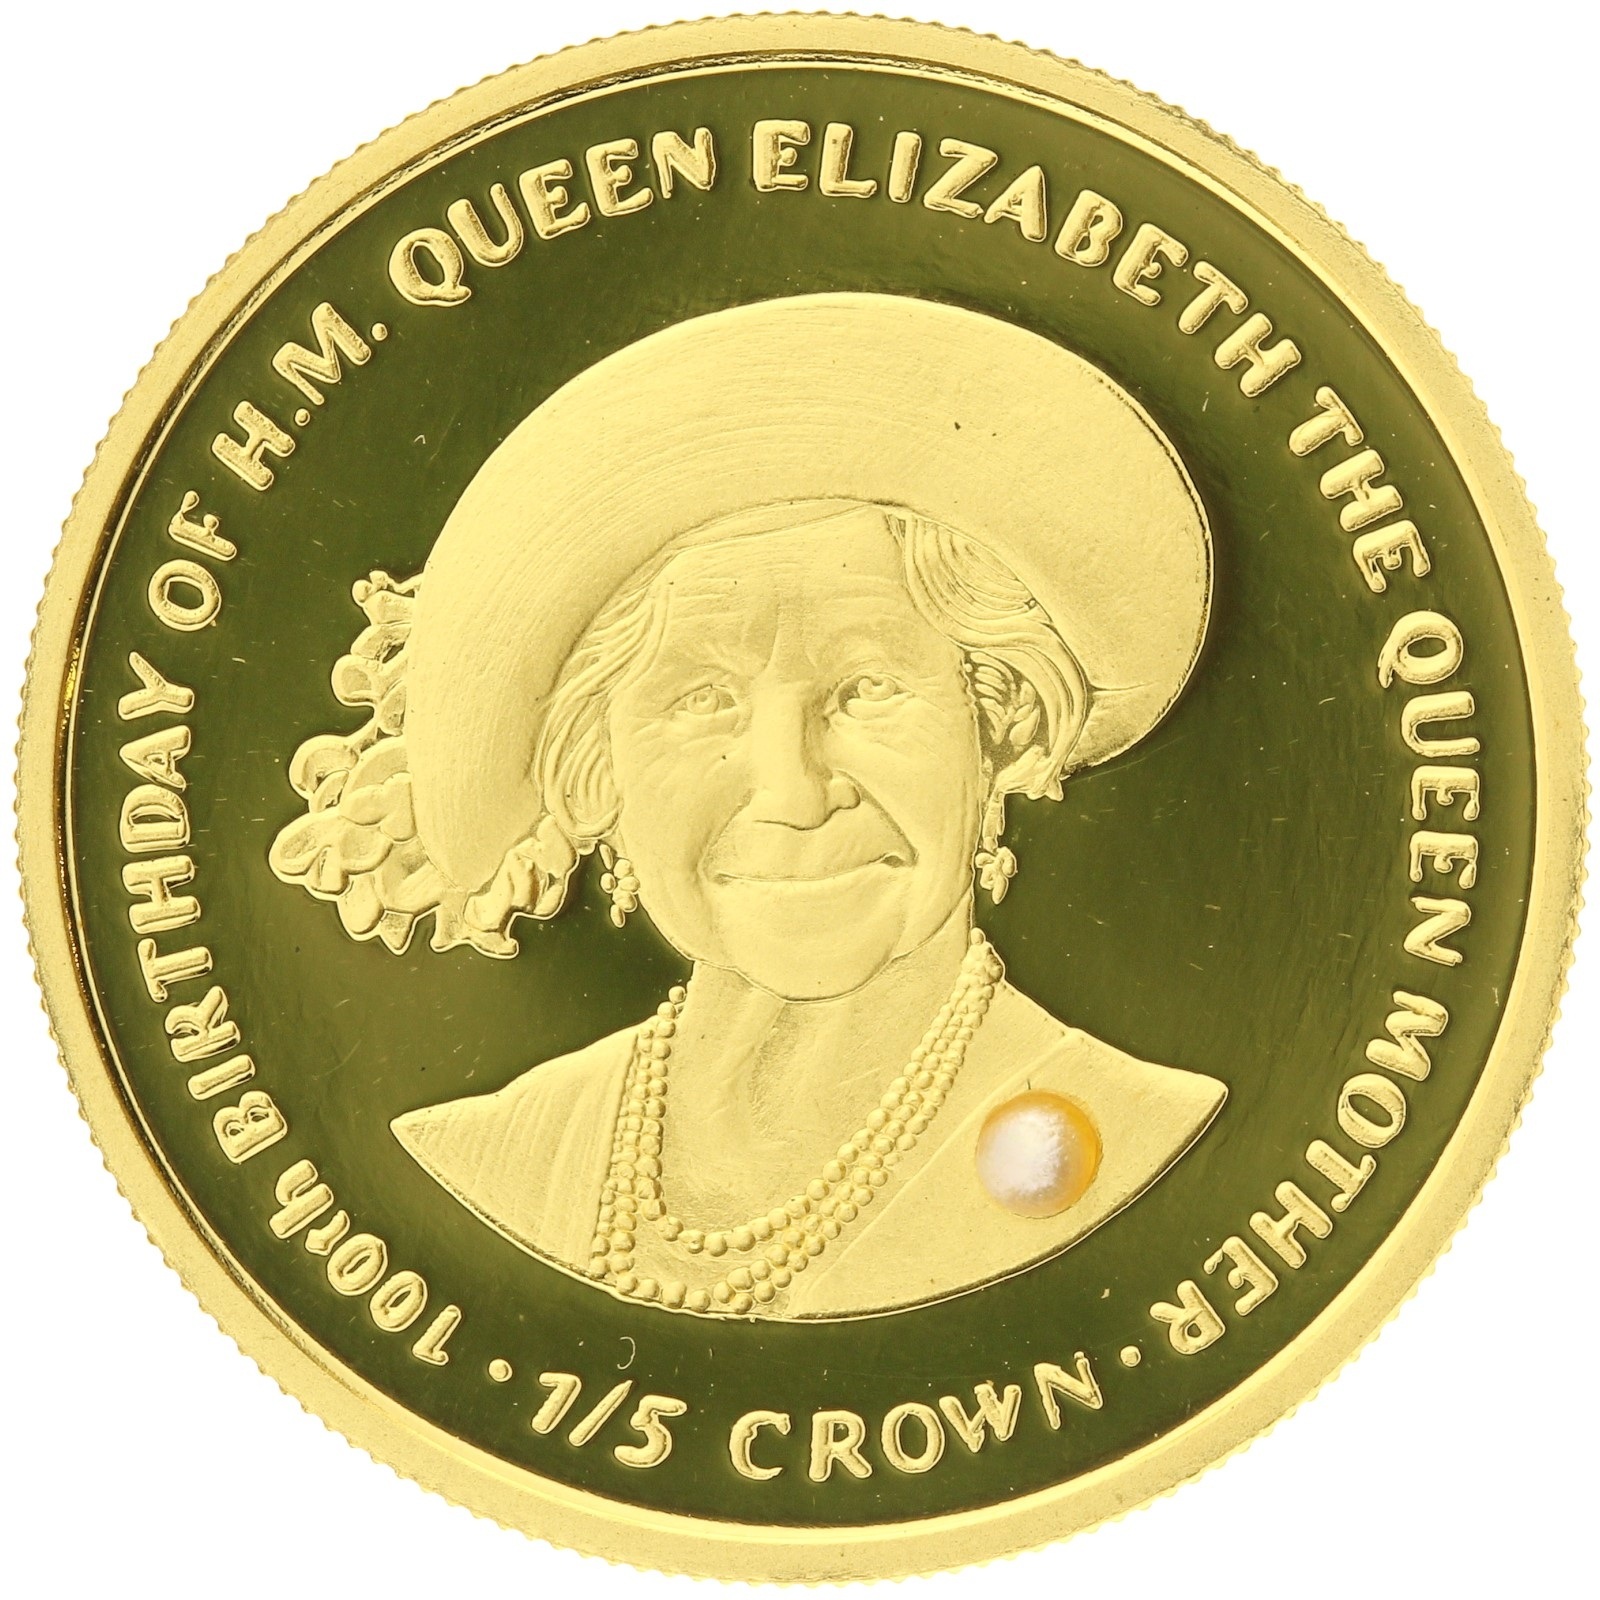 Isle of man - ⅕ Crown - 2000 - 100th Birthday of the Queen Mother - 1/5oz